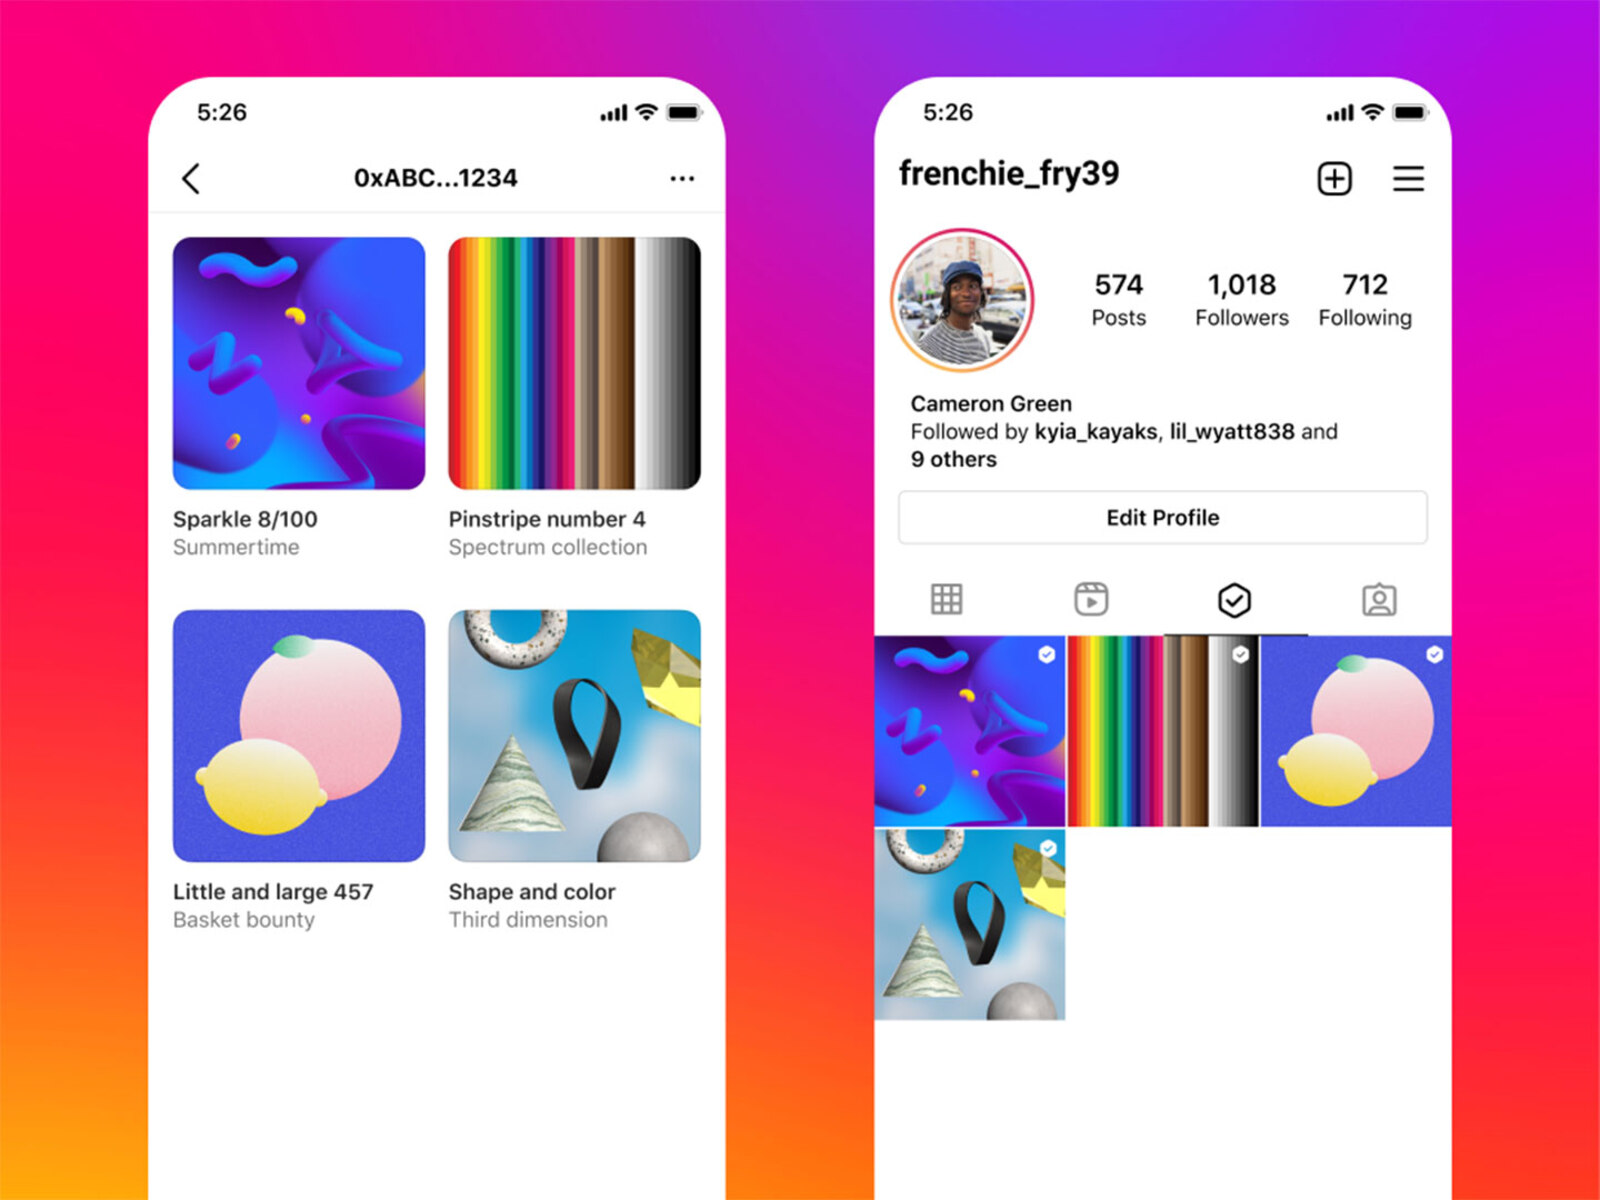 How To Add NFT To Instagram